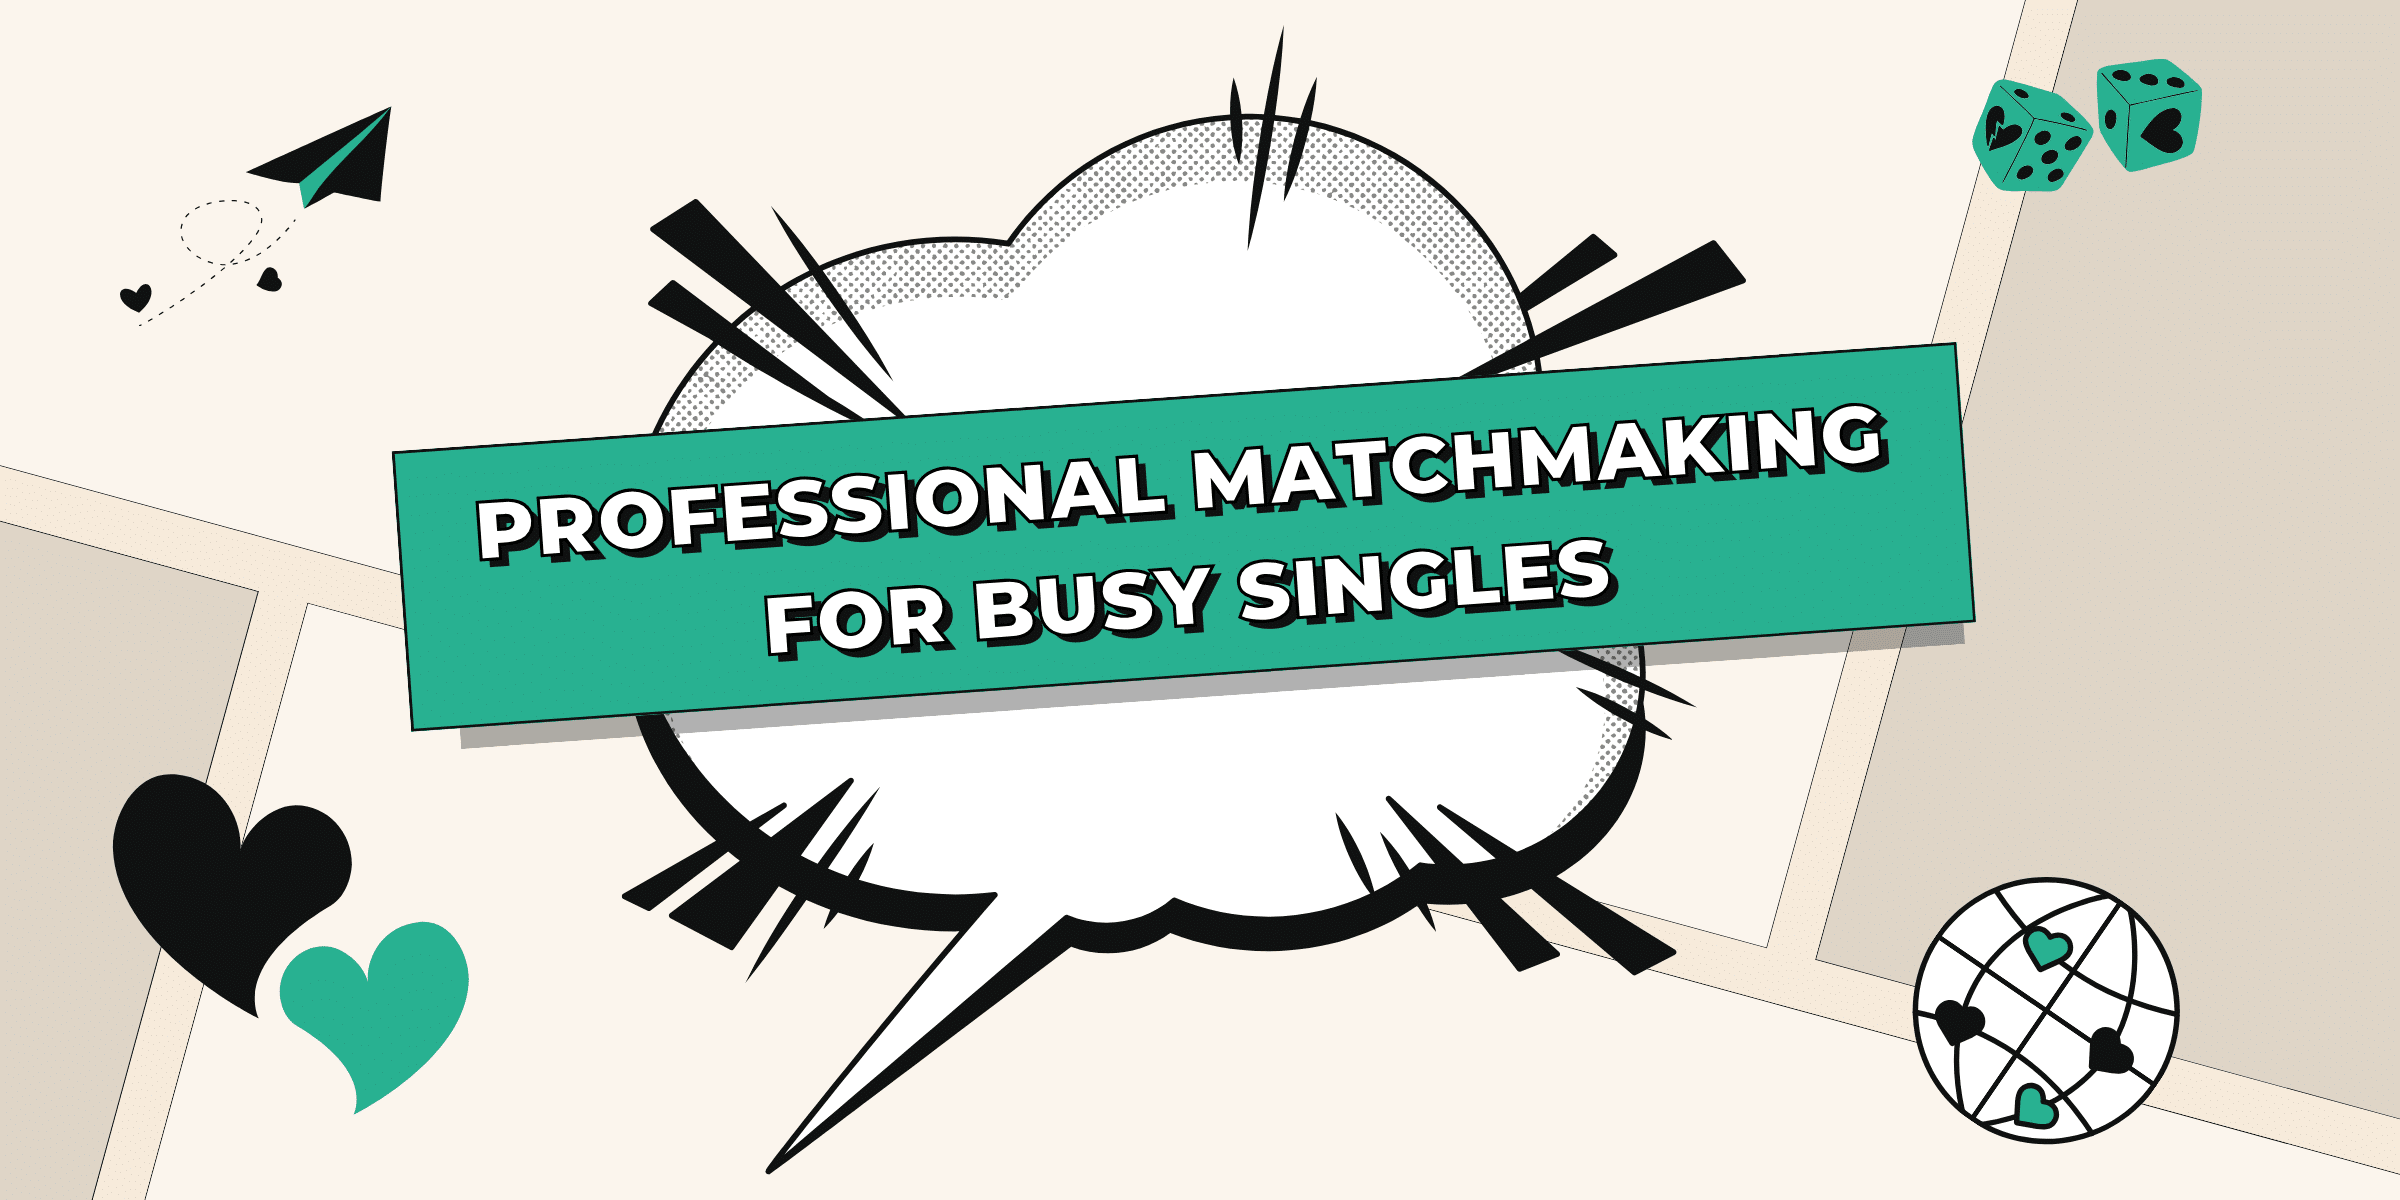 Explore professional matchmaking for busy singles: a personalized, efficient way to find love tailored to your busy lifestyle.